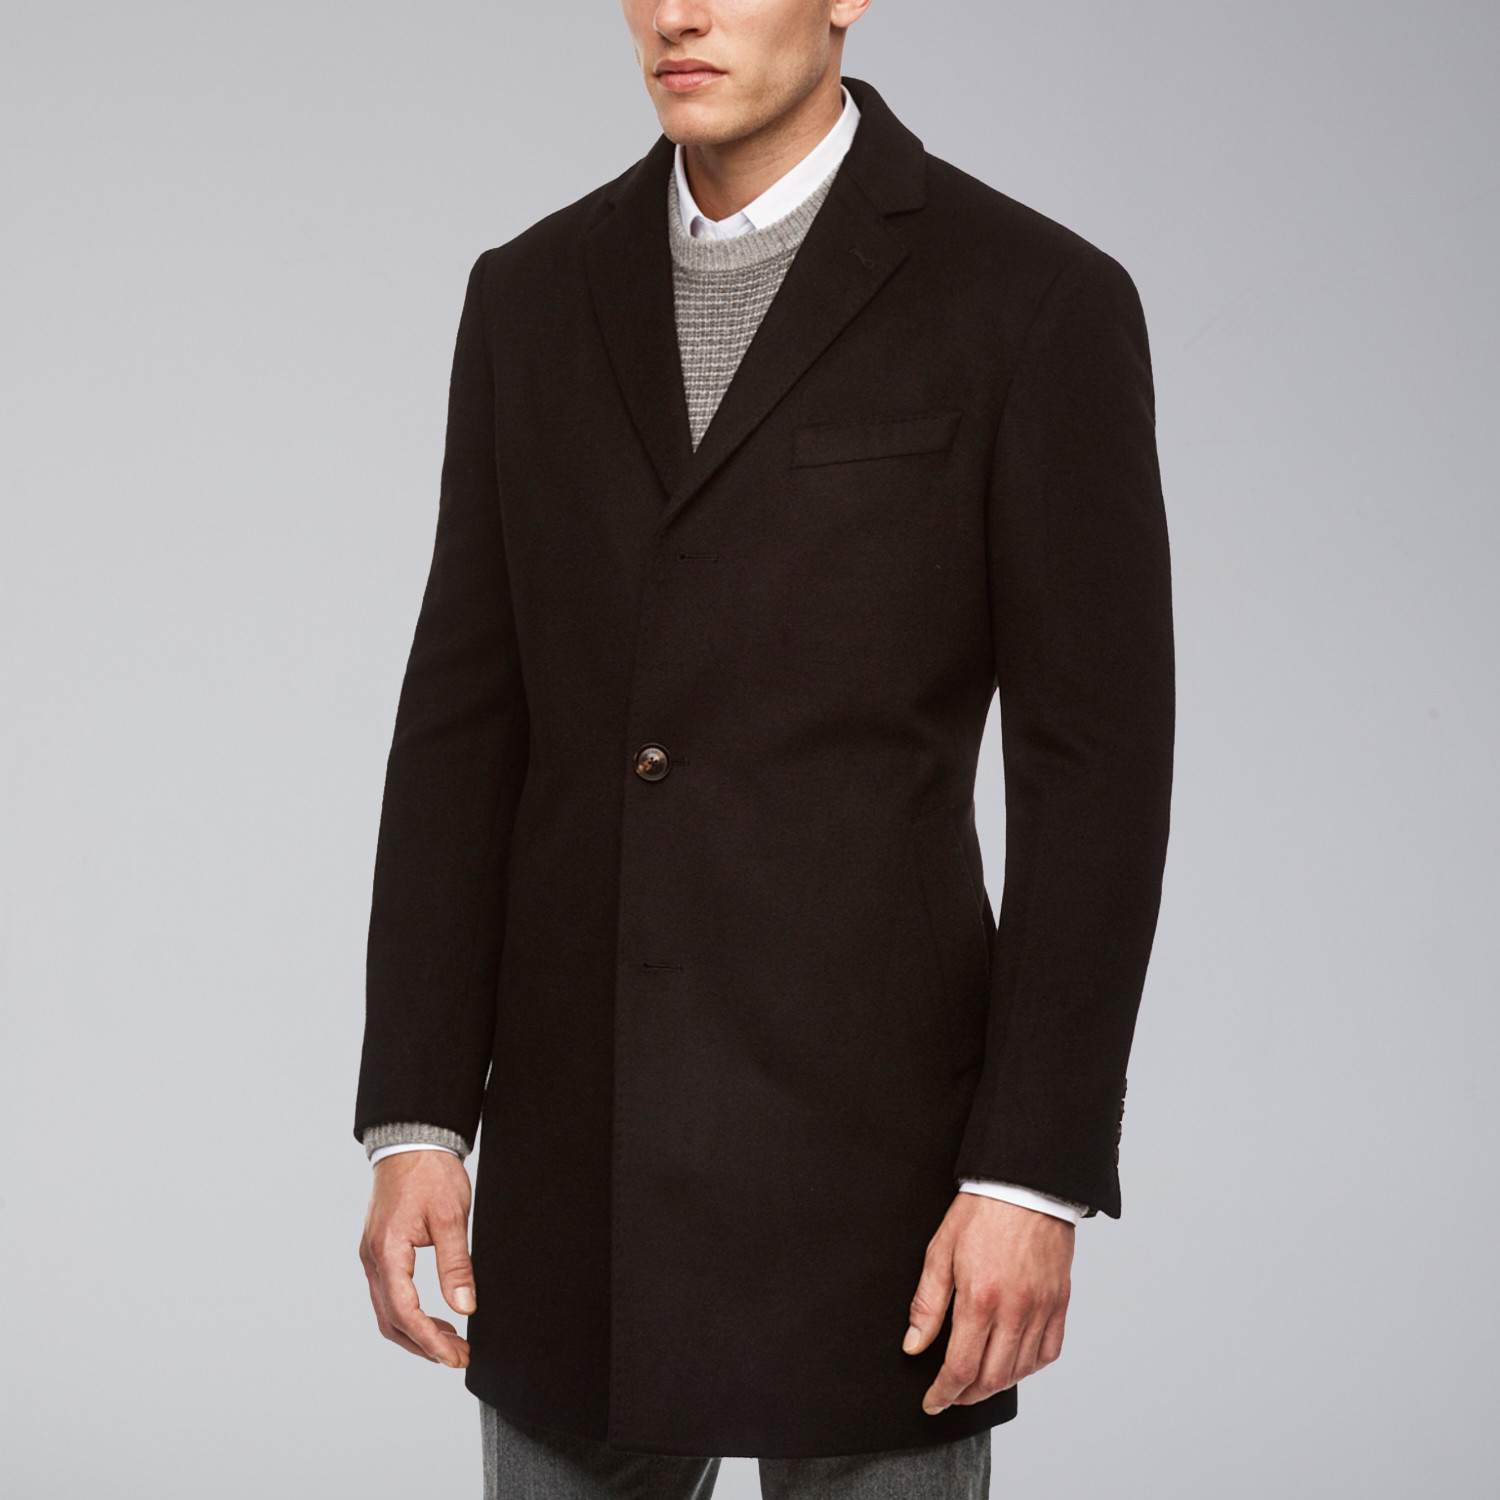 St-Paul Wool + Cashmere Heritage Overcoat // Navy (US: 48R) - Cardinal ...